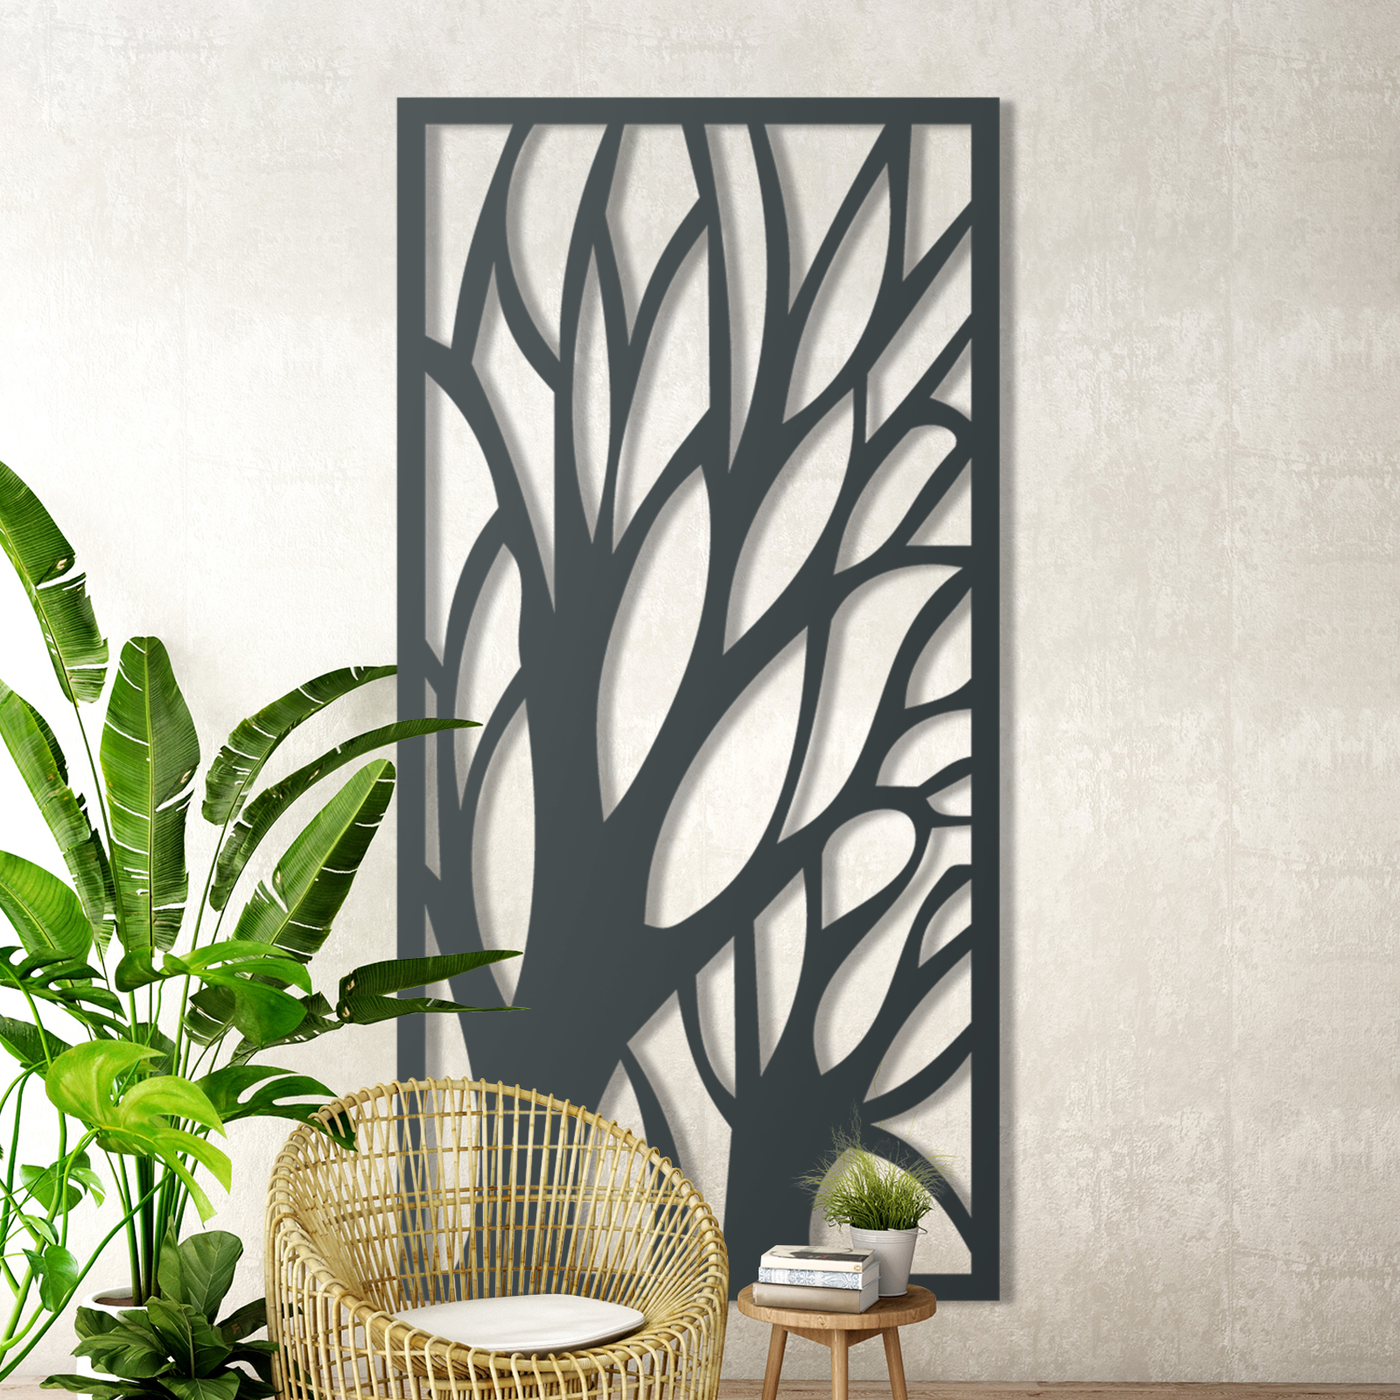 North Wind Metal Screen: Add a Touch of Style to Your Garden